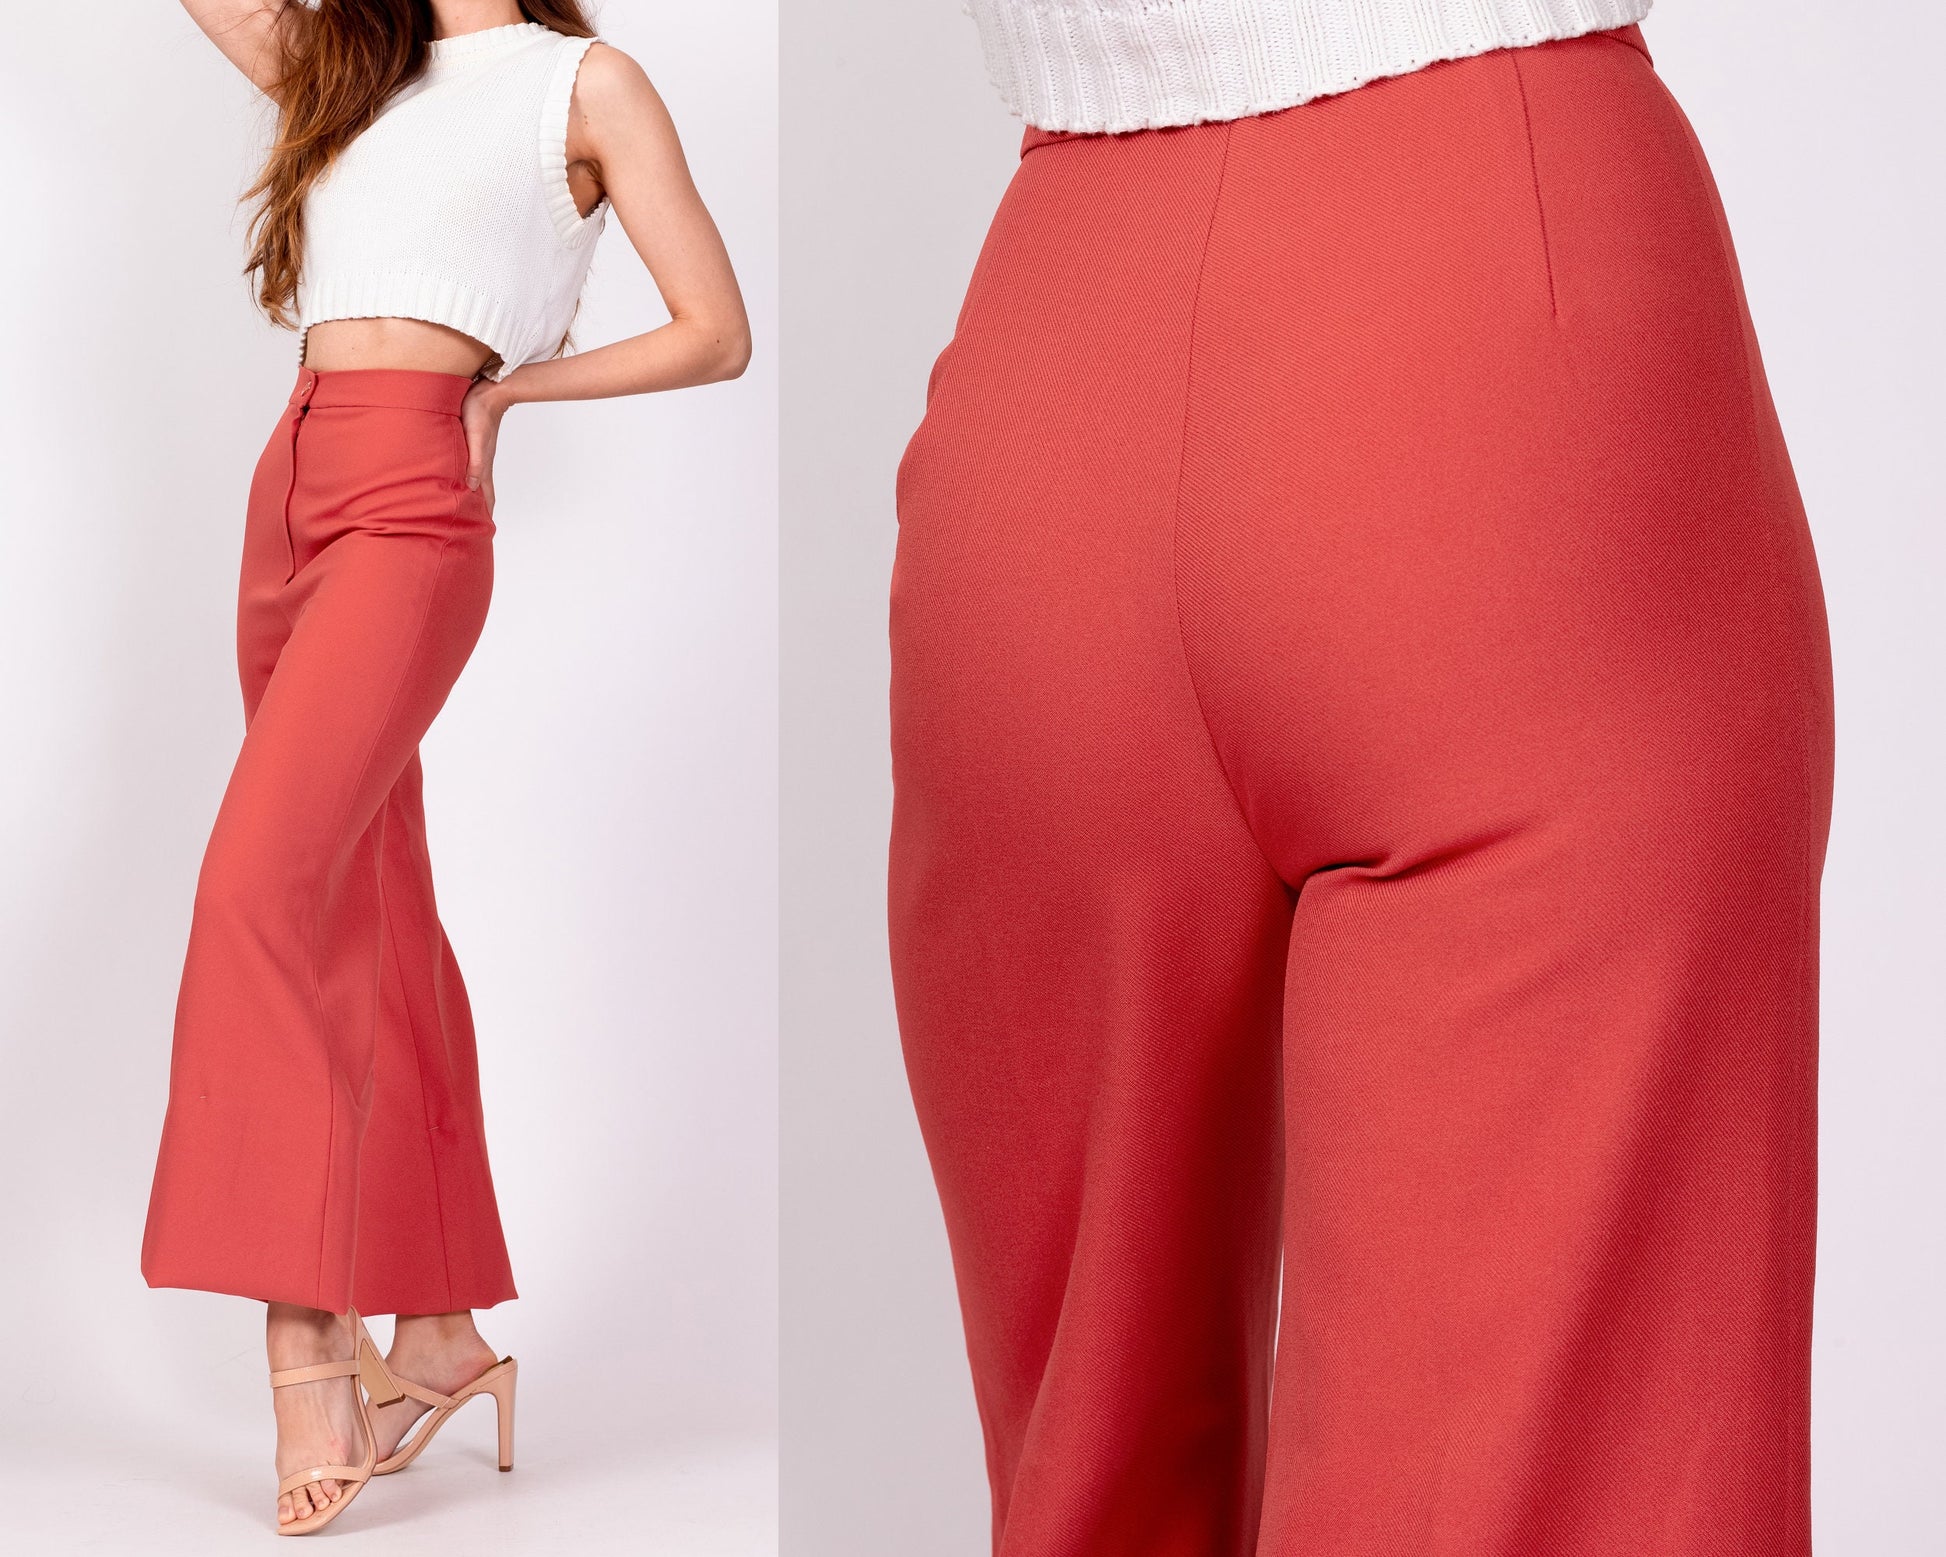 70s Salmon Pink High Waisted Flared Pants - Extra Small, 23.5" 